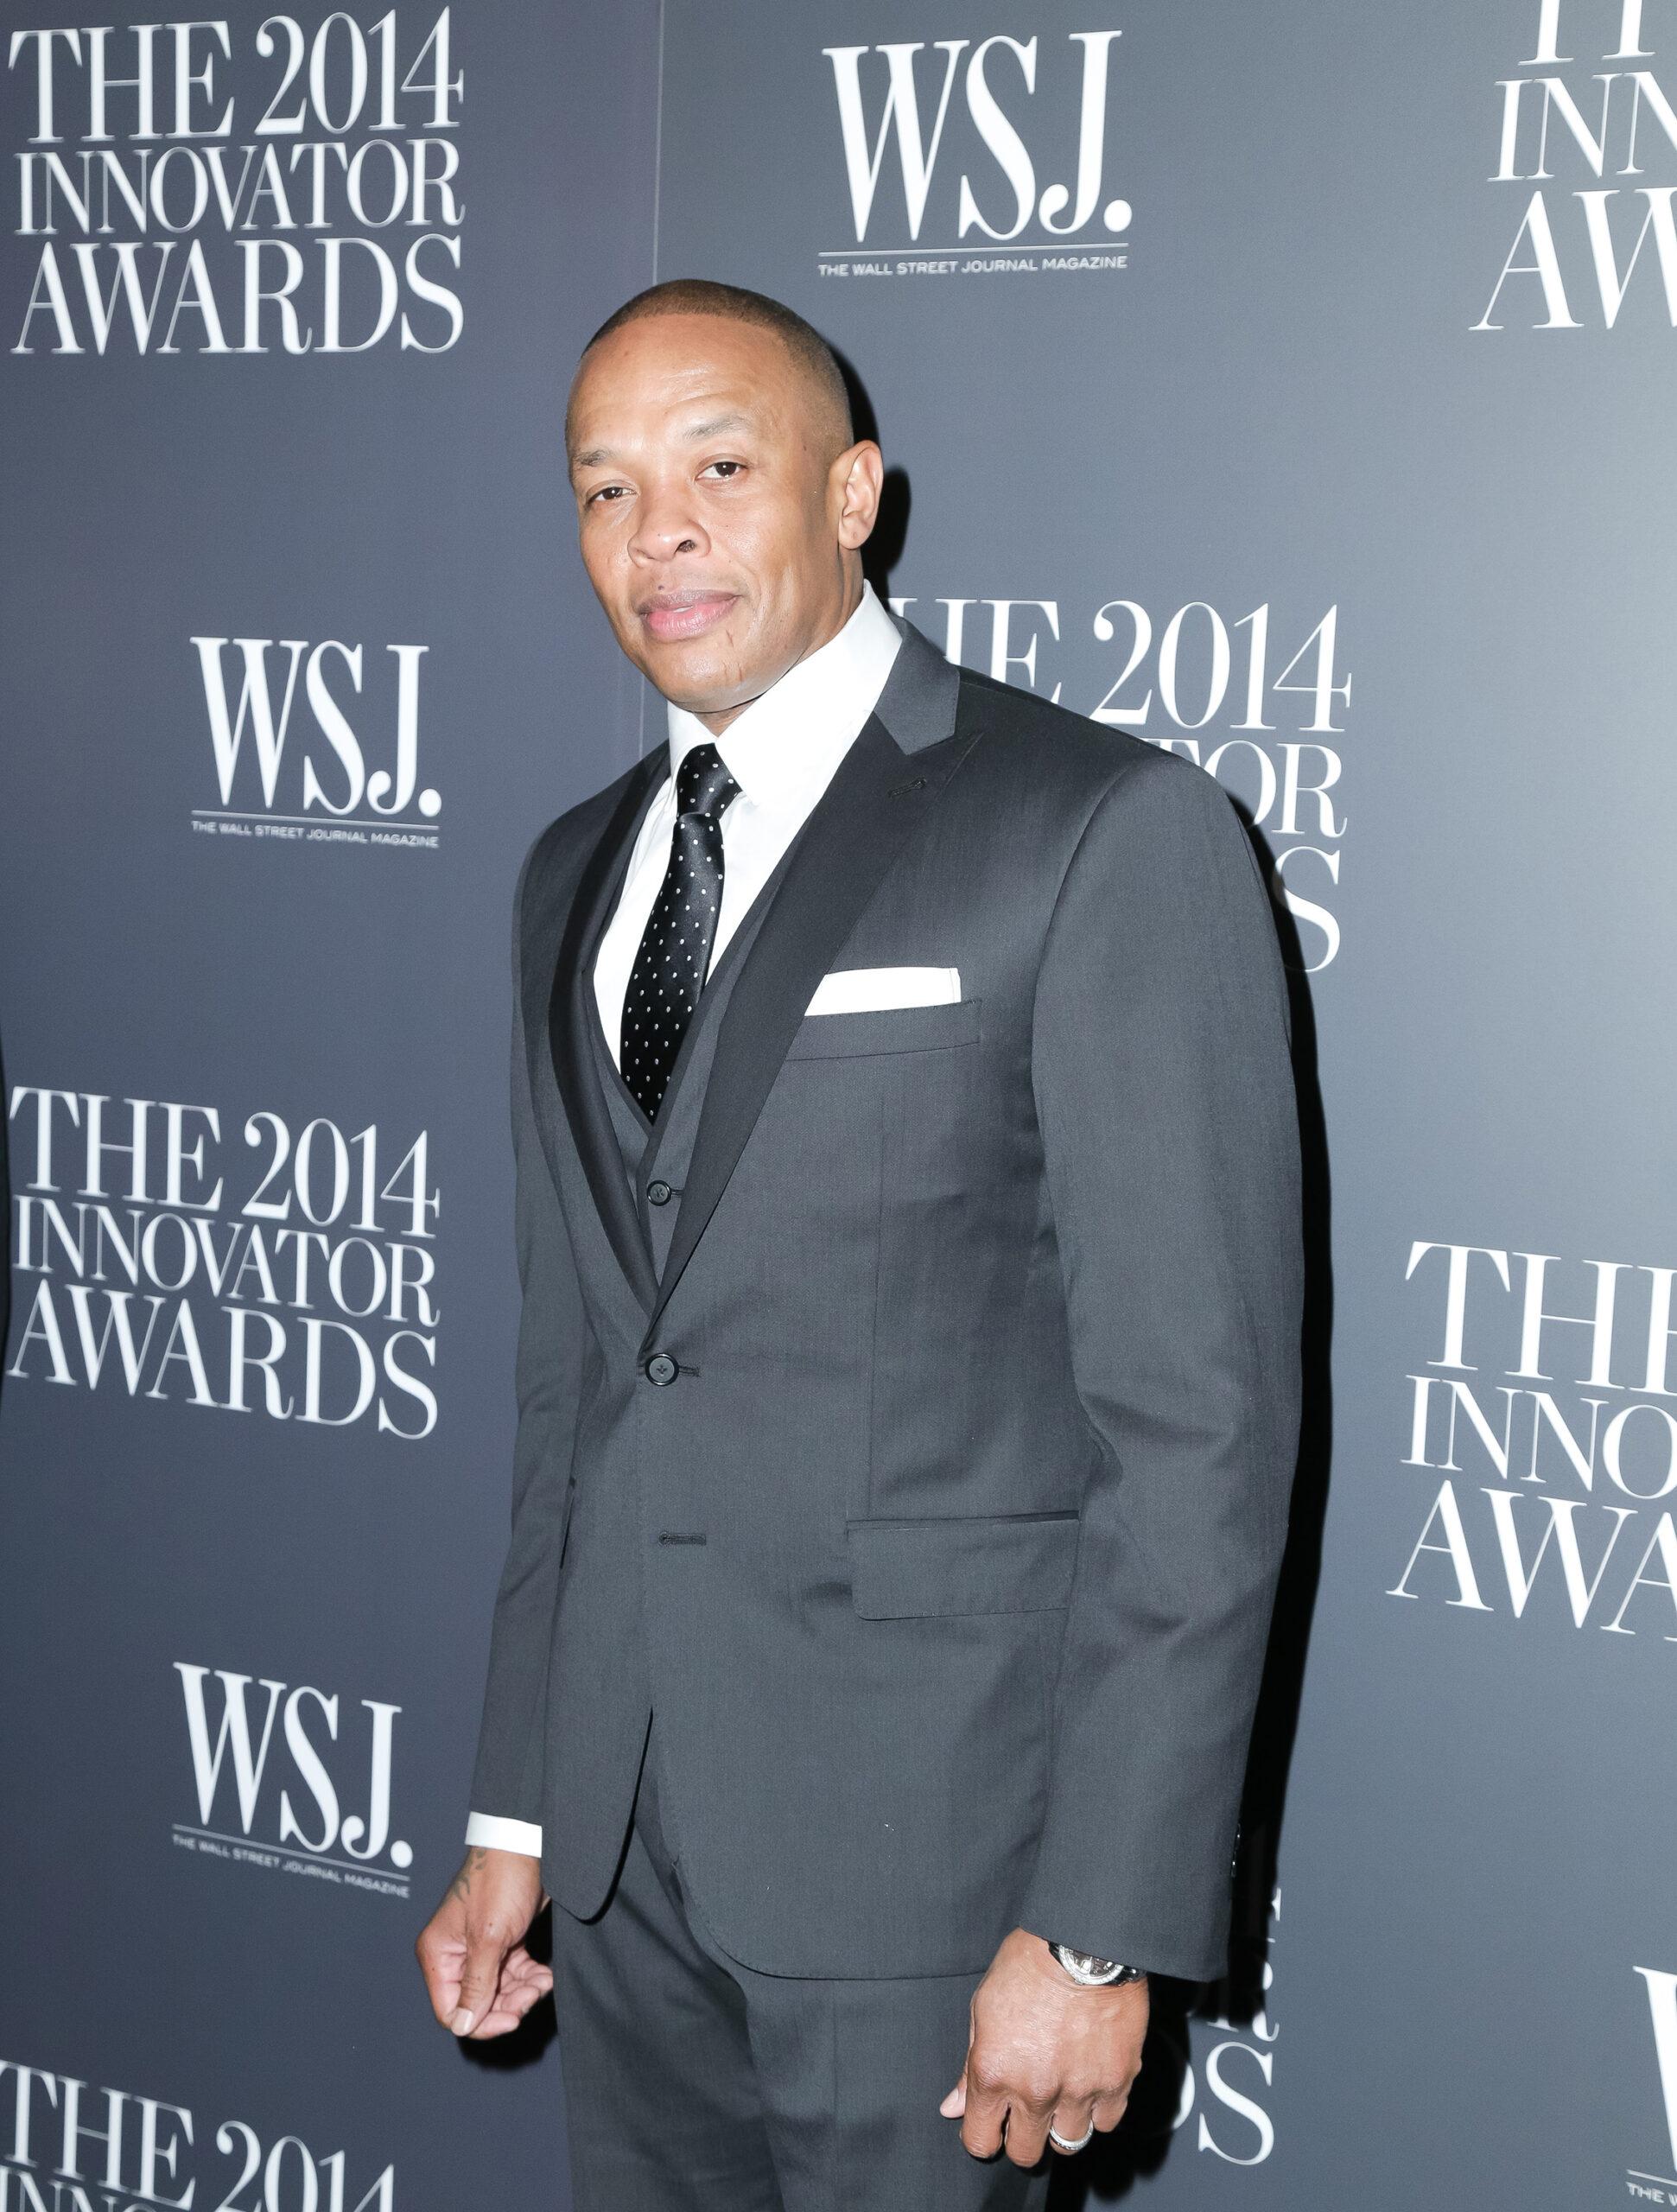 Dr. Dre's new album ëComptoní a master class in music, culture, business